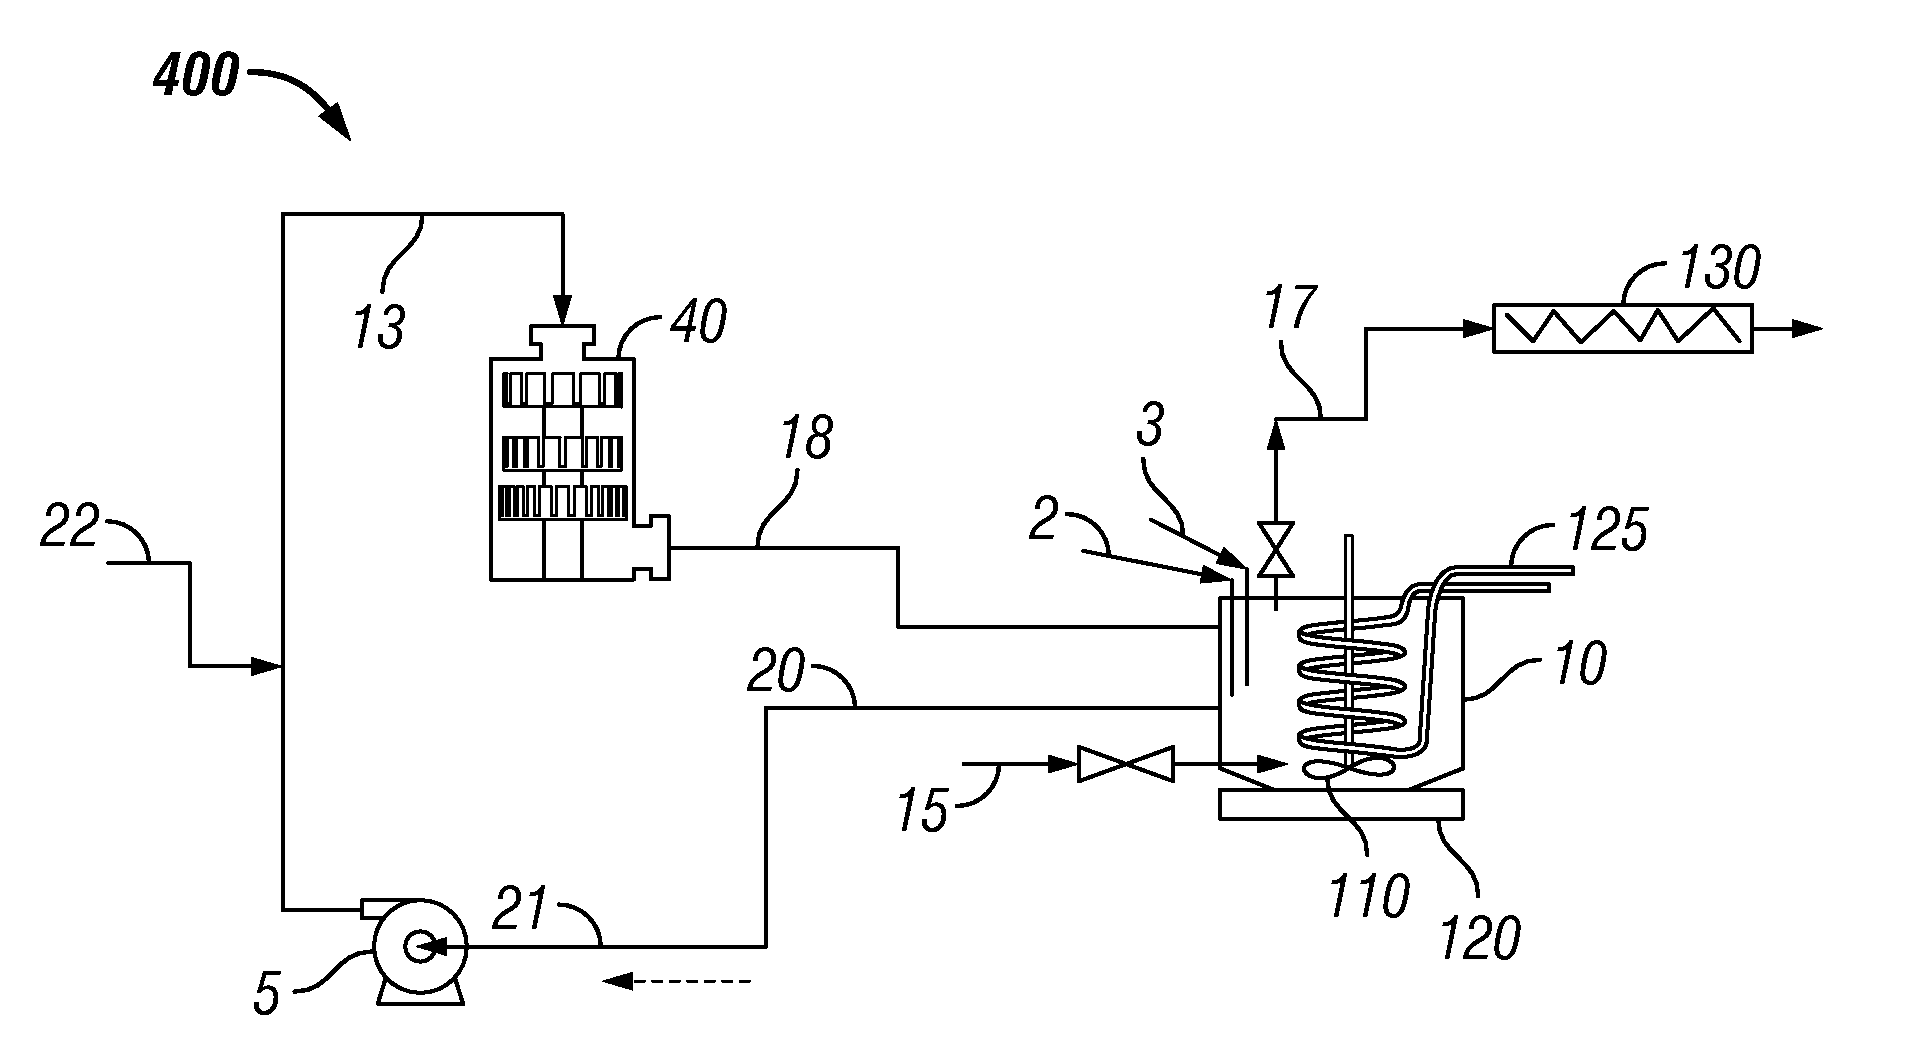 System and process for hydrodesulfurization, hydrodenitrogenation, or hydrofinishing